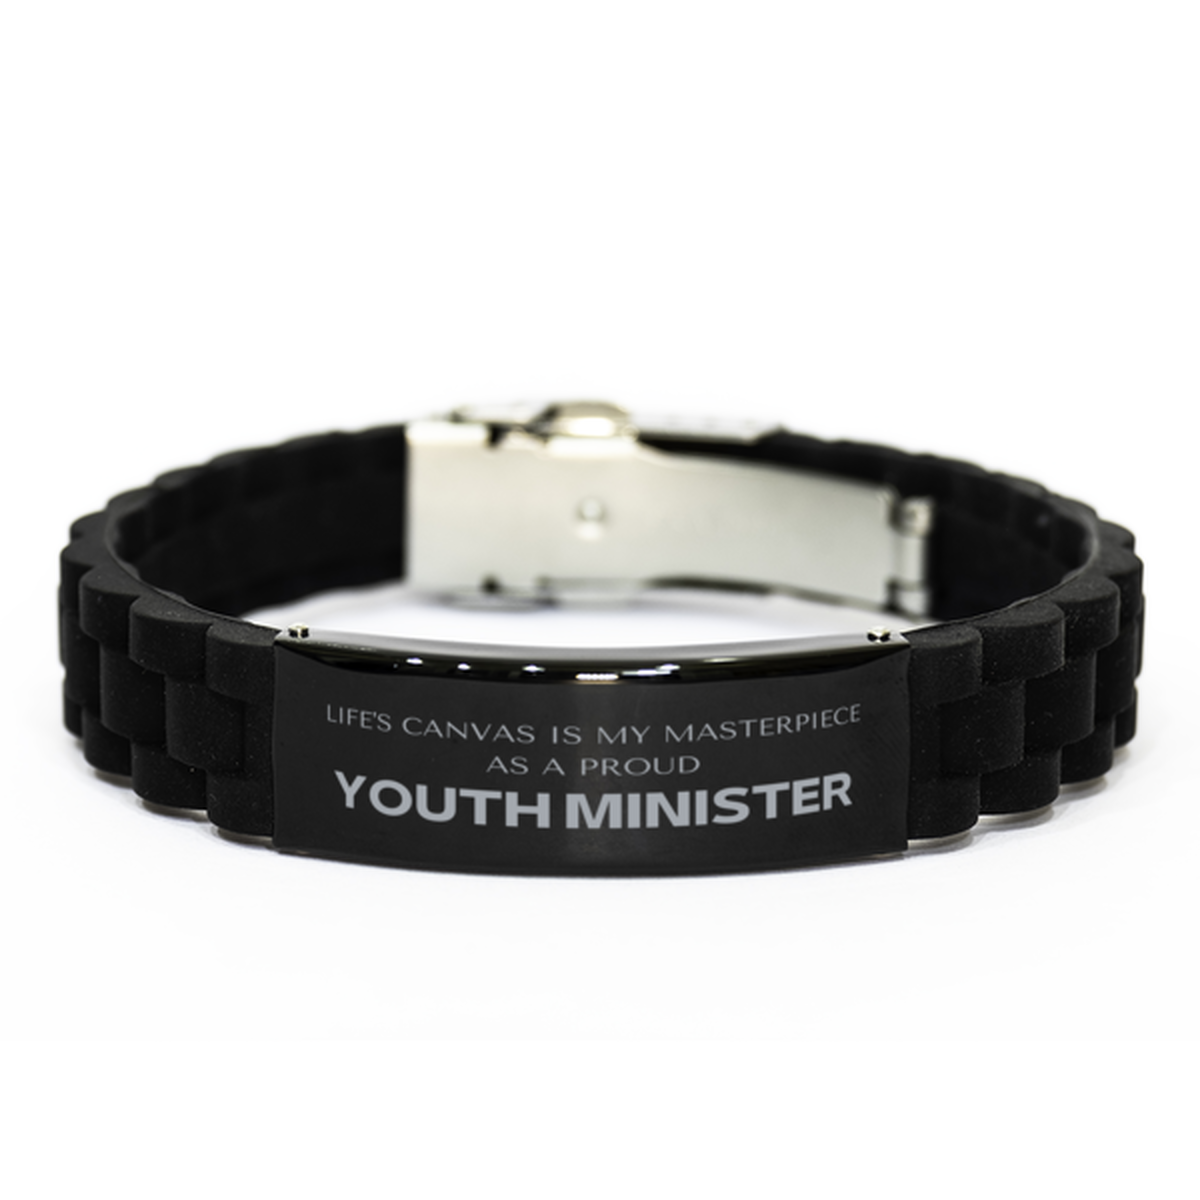 Proud Youth Minister Gifts, Life's canvas is my masterpiece, Epic Birthday Christmas Unique Black Glidelock Clasp Bracelet For Youth Minister, Coworkers, Men, Women, Friends